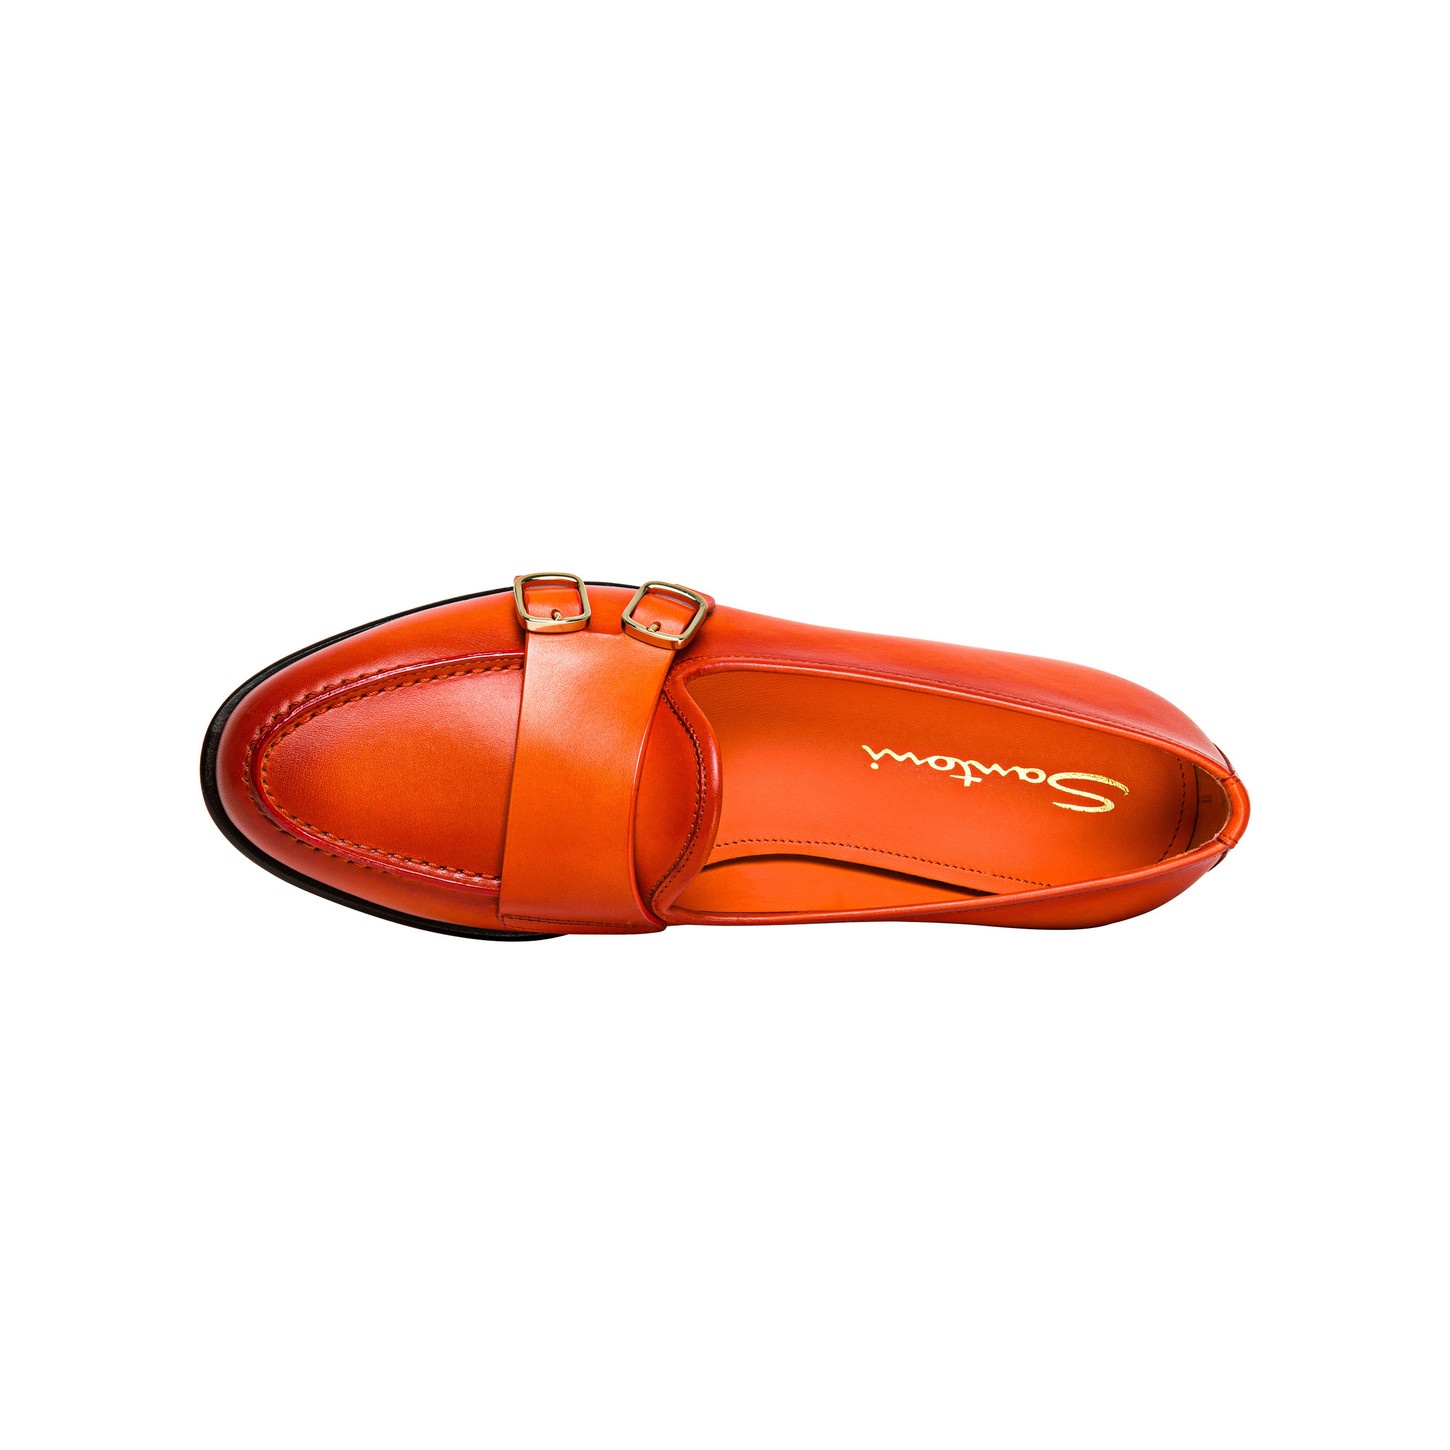 Women’s orange leather Andrea double-buckle loafer - 4